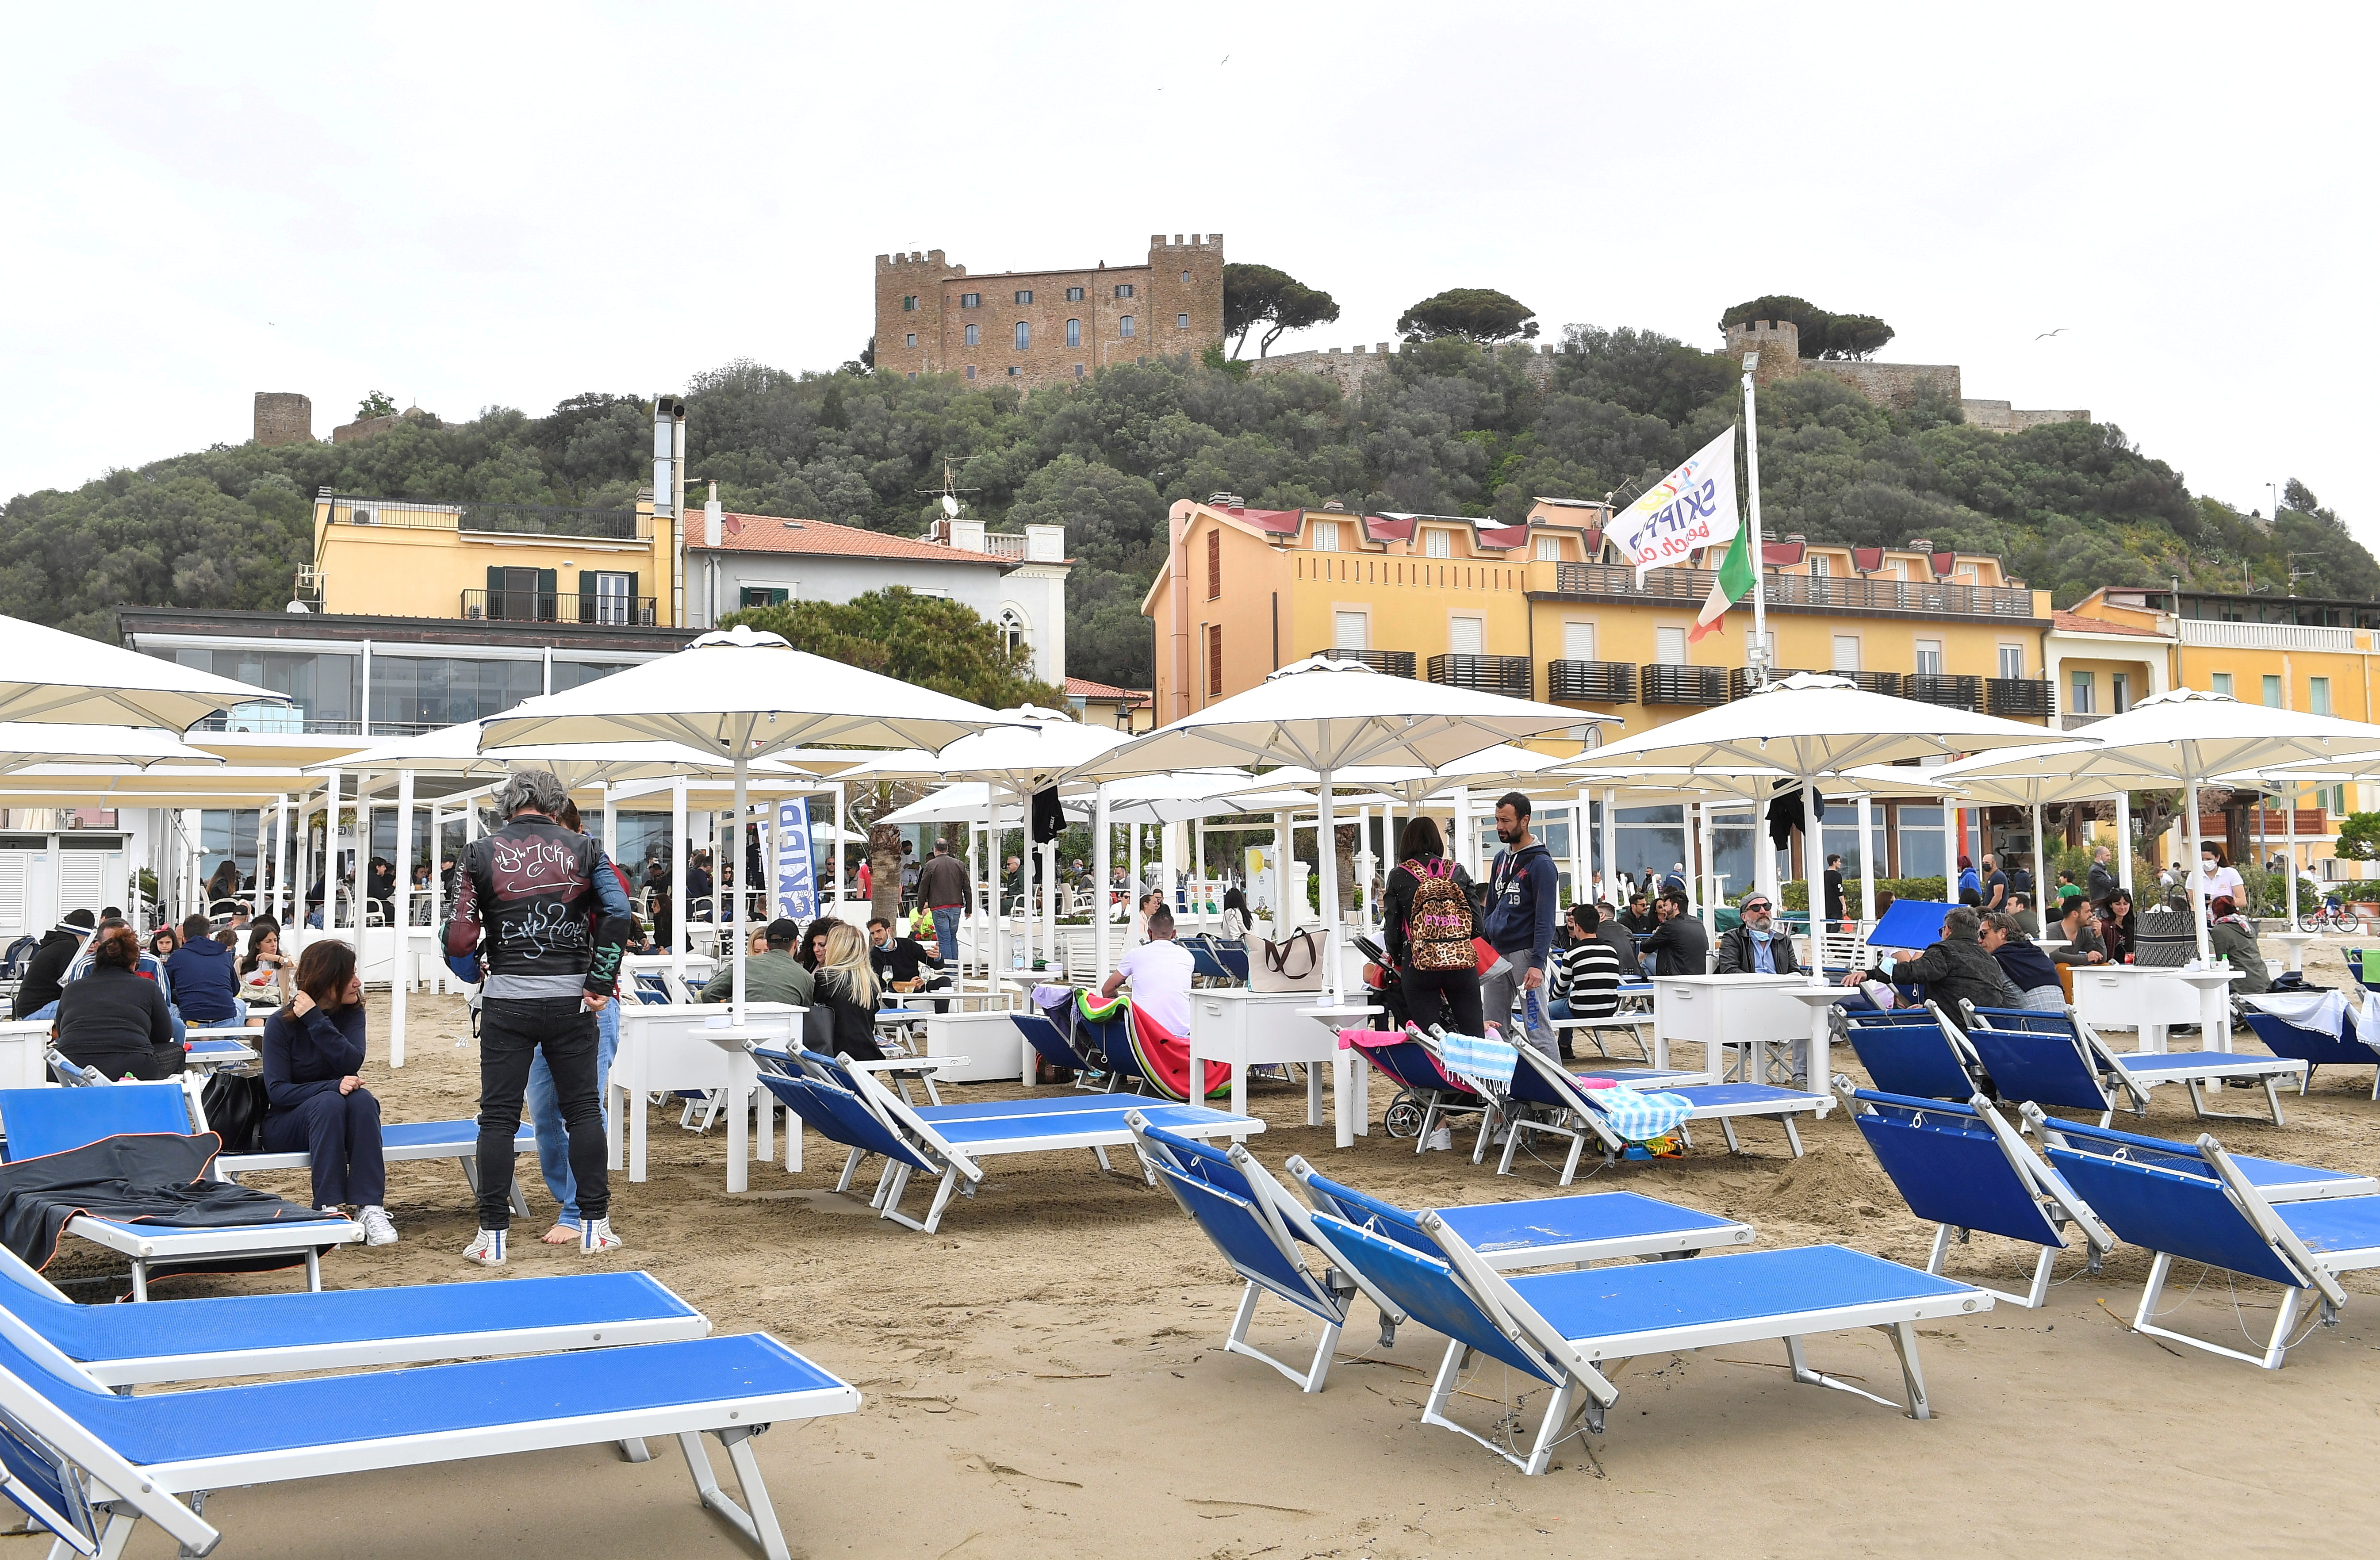 Beaches in Tuscany open after the easing of COVID-19 restrictions, in Castiglione della Pescaia